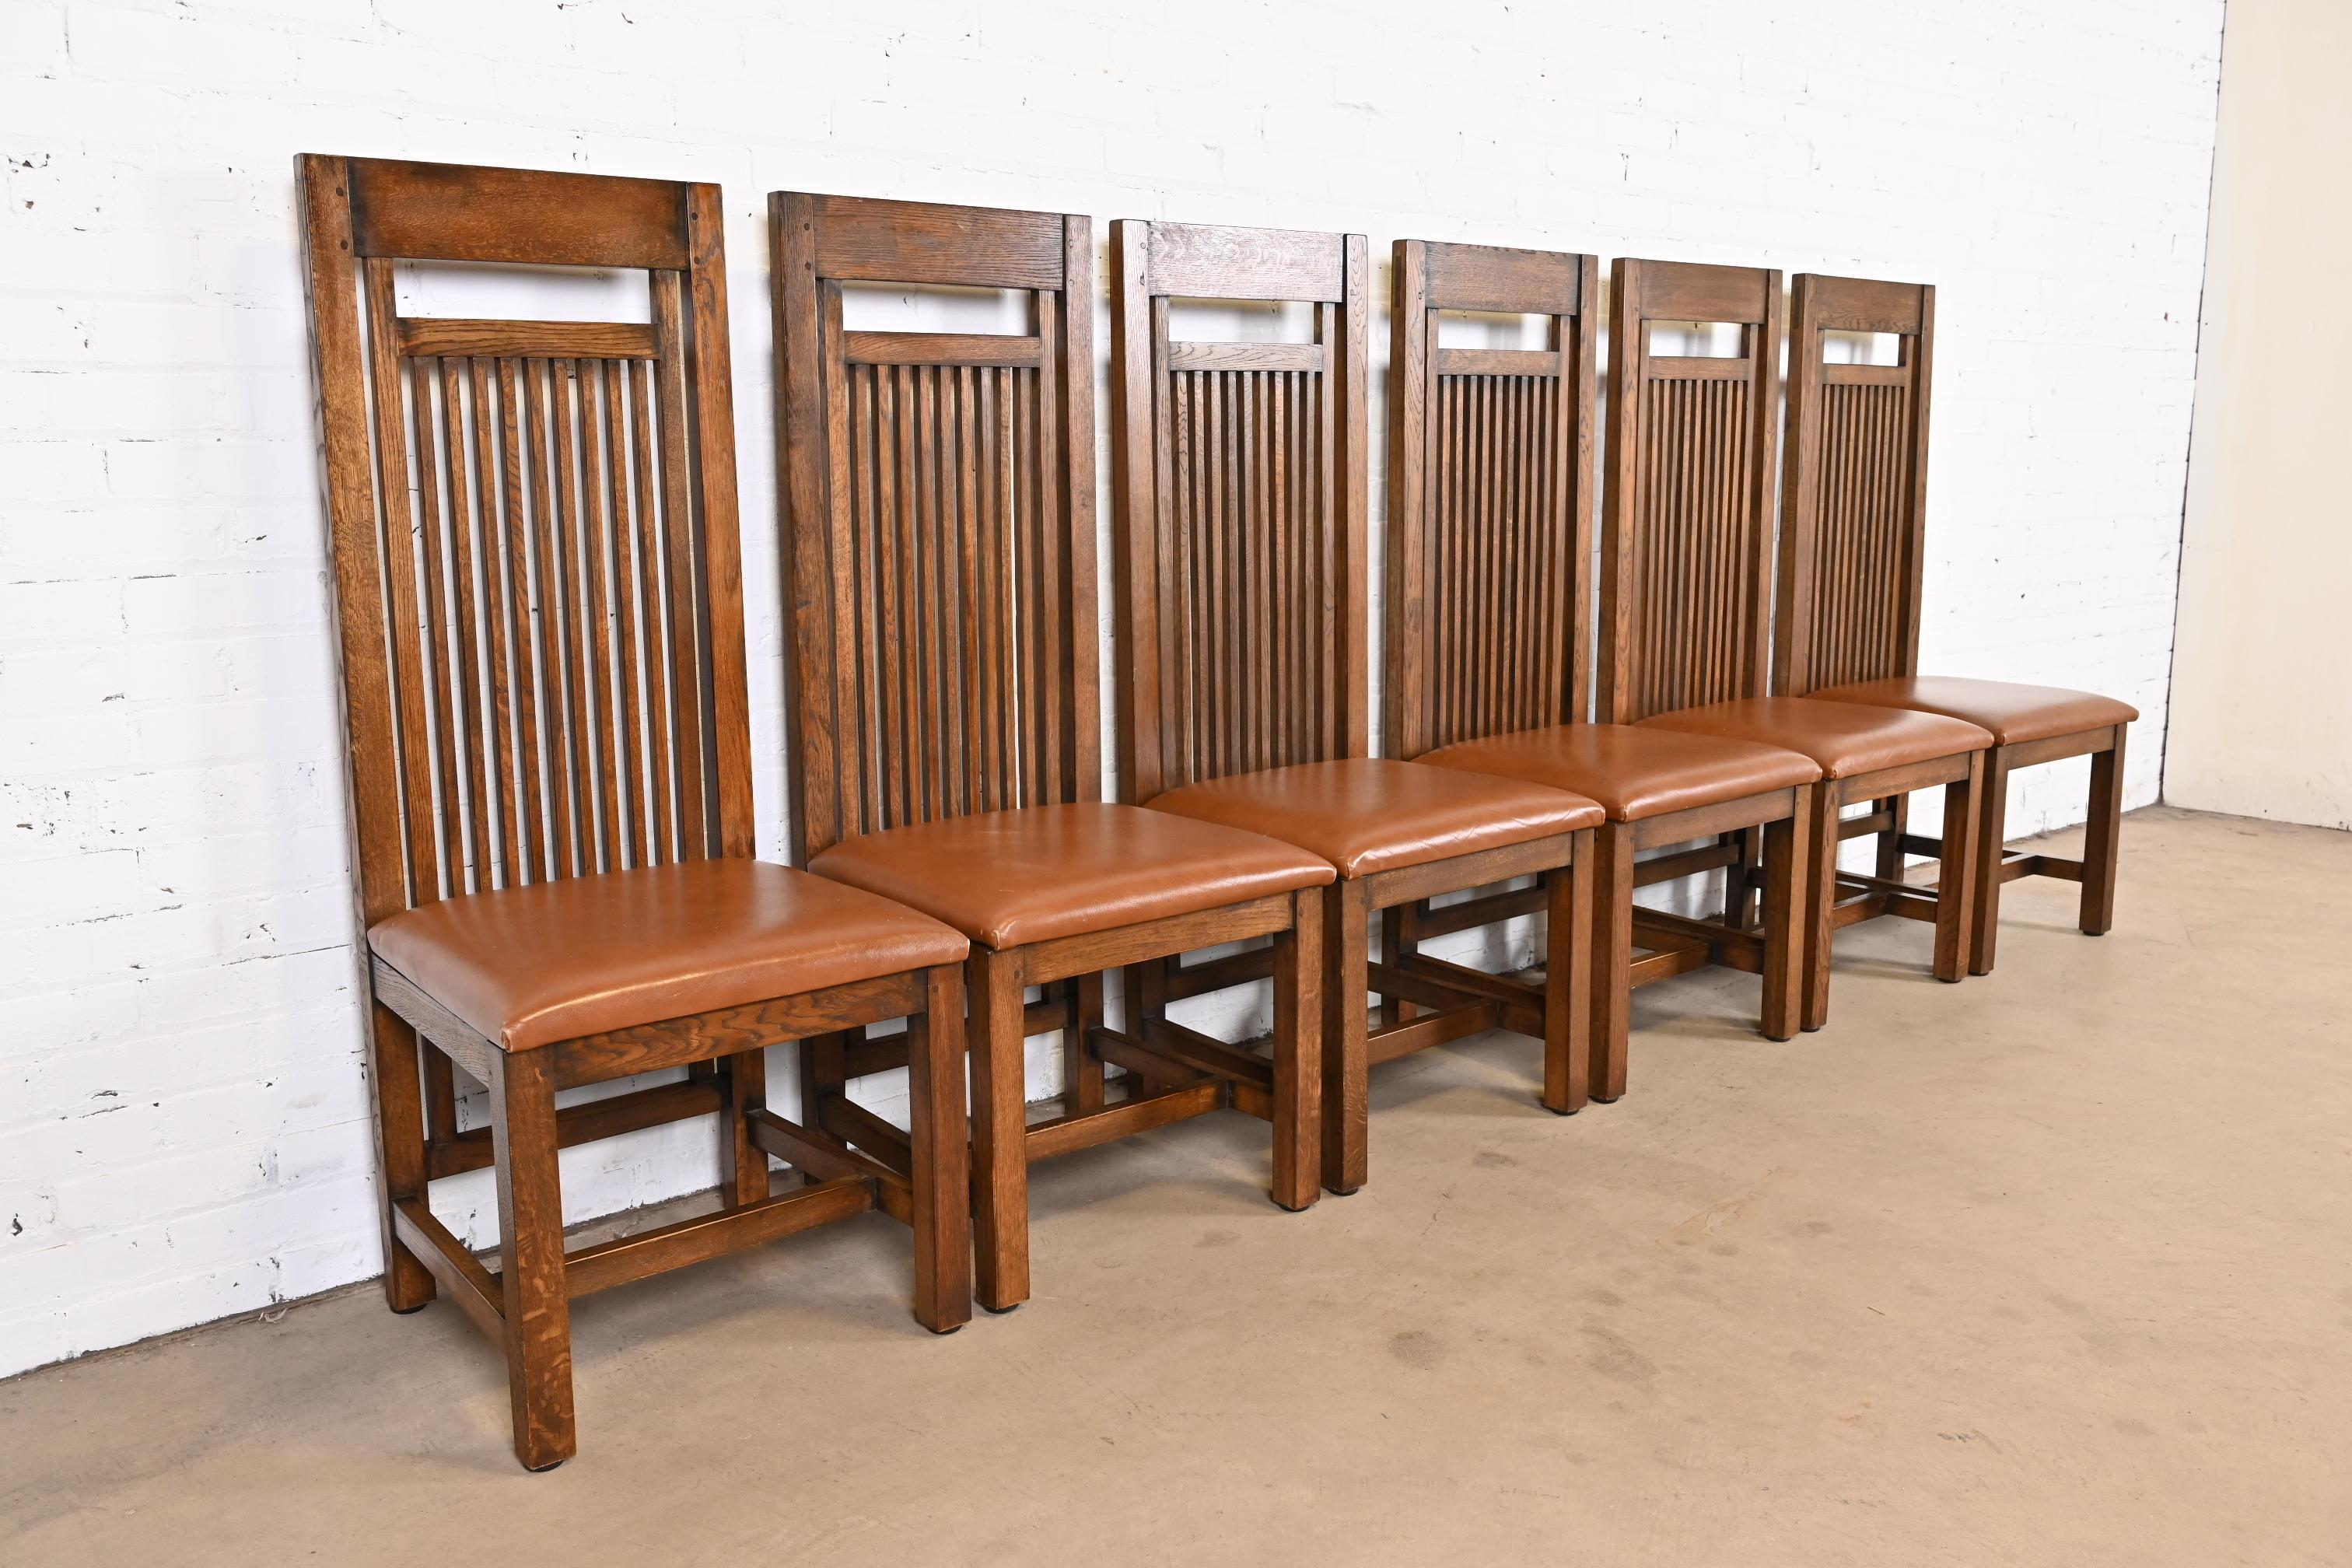 Late 20th Century Frank Lloyd Wright Arts & Crafts Oak and Leather High Back Dining Chairs